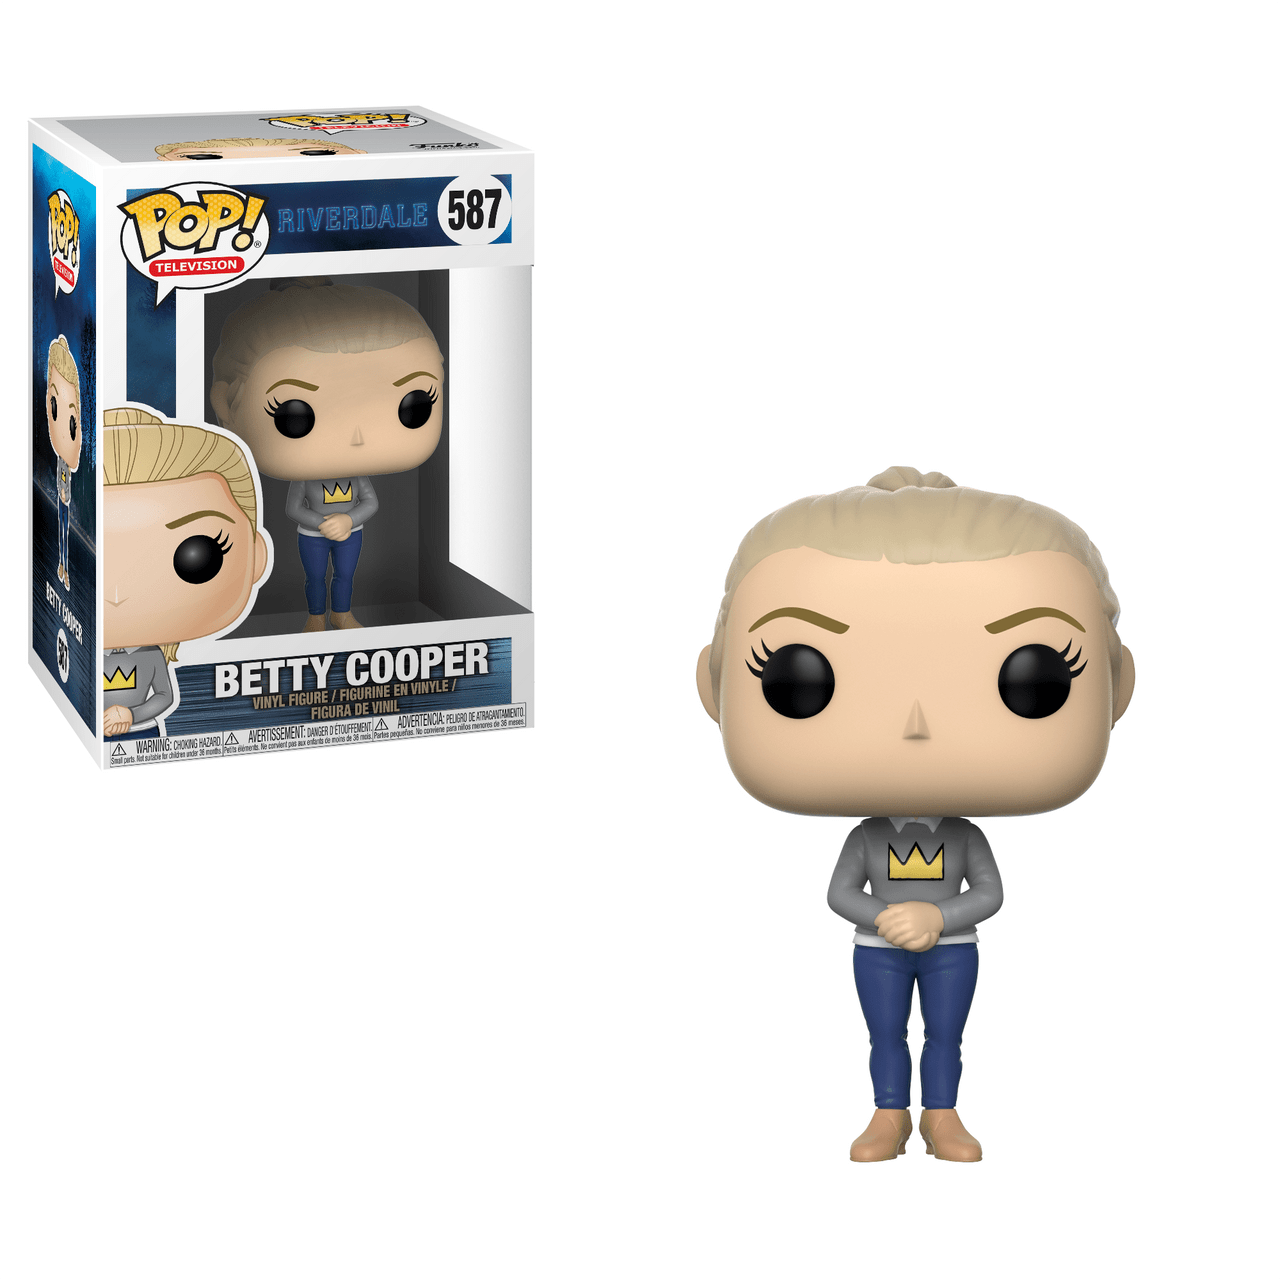 POP! Television - Riverdale - Betty Cooper #587